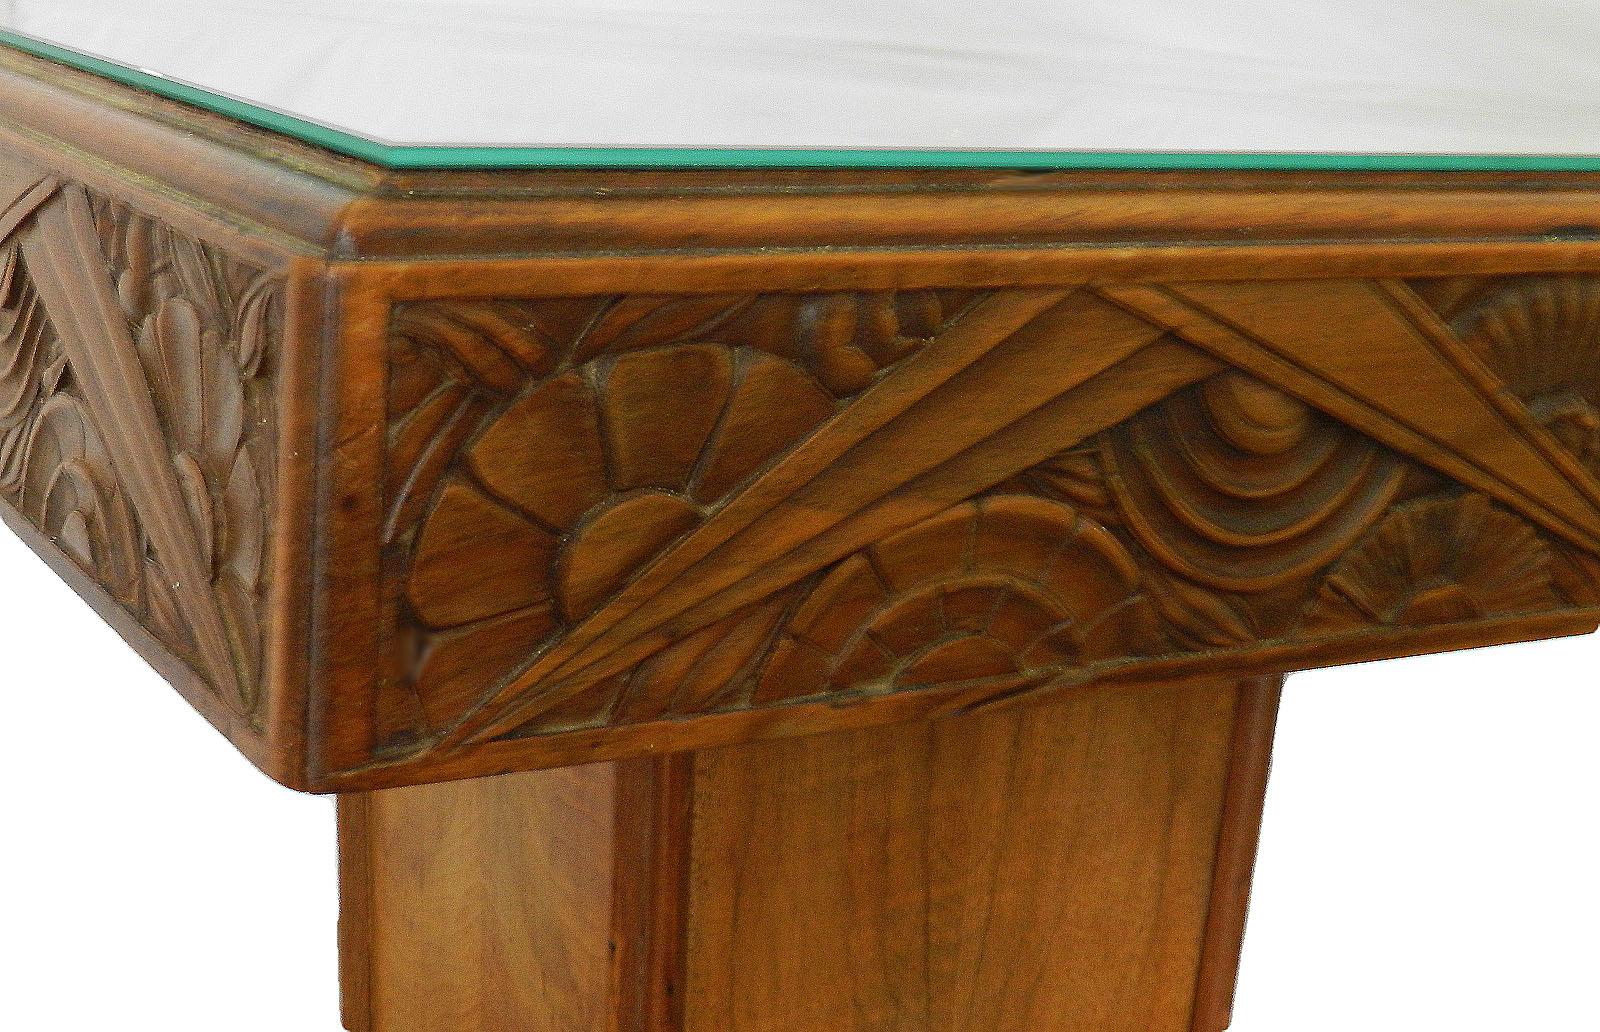 Mid-20th Century Art Deco Pedestal Table Sellette Mirror Top French Manner Sue et Mare